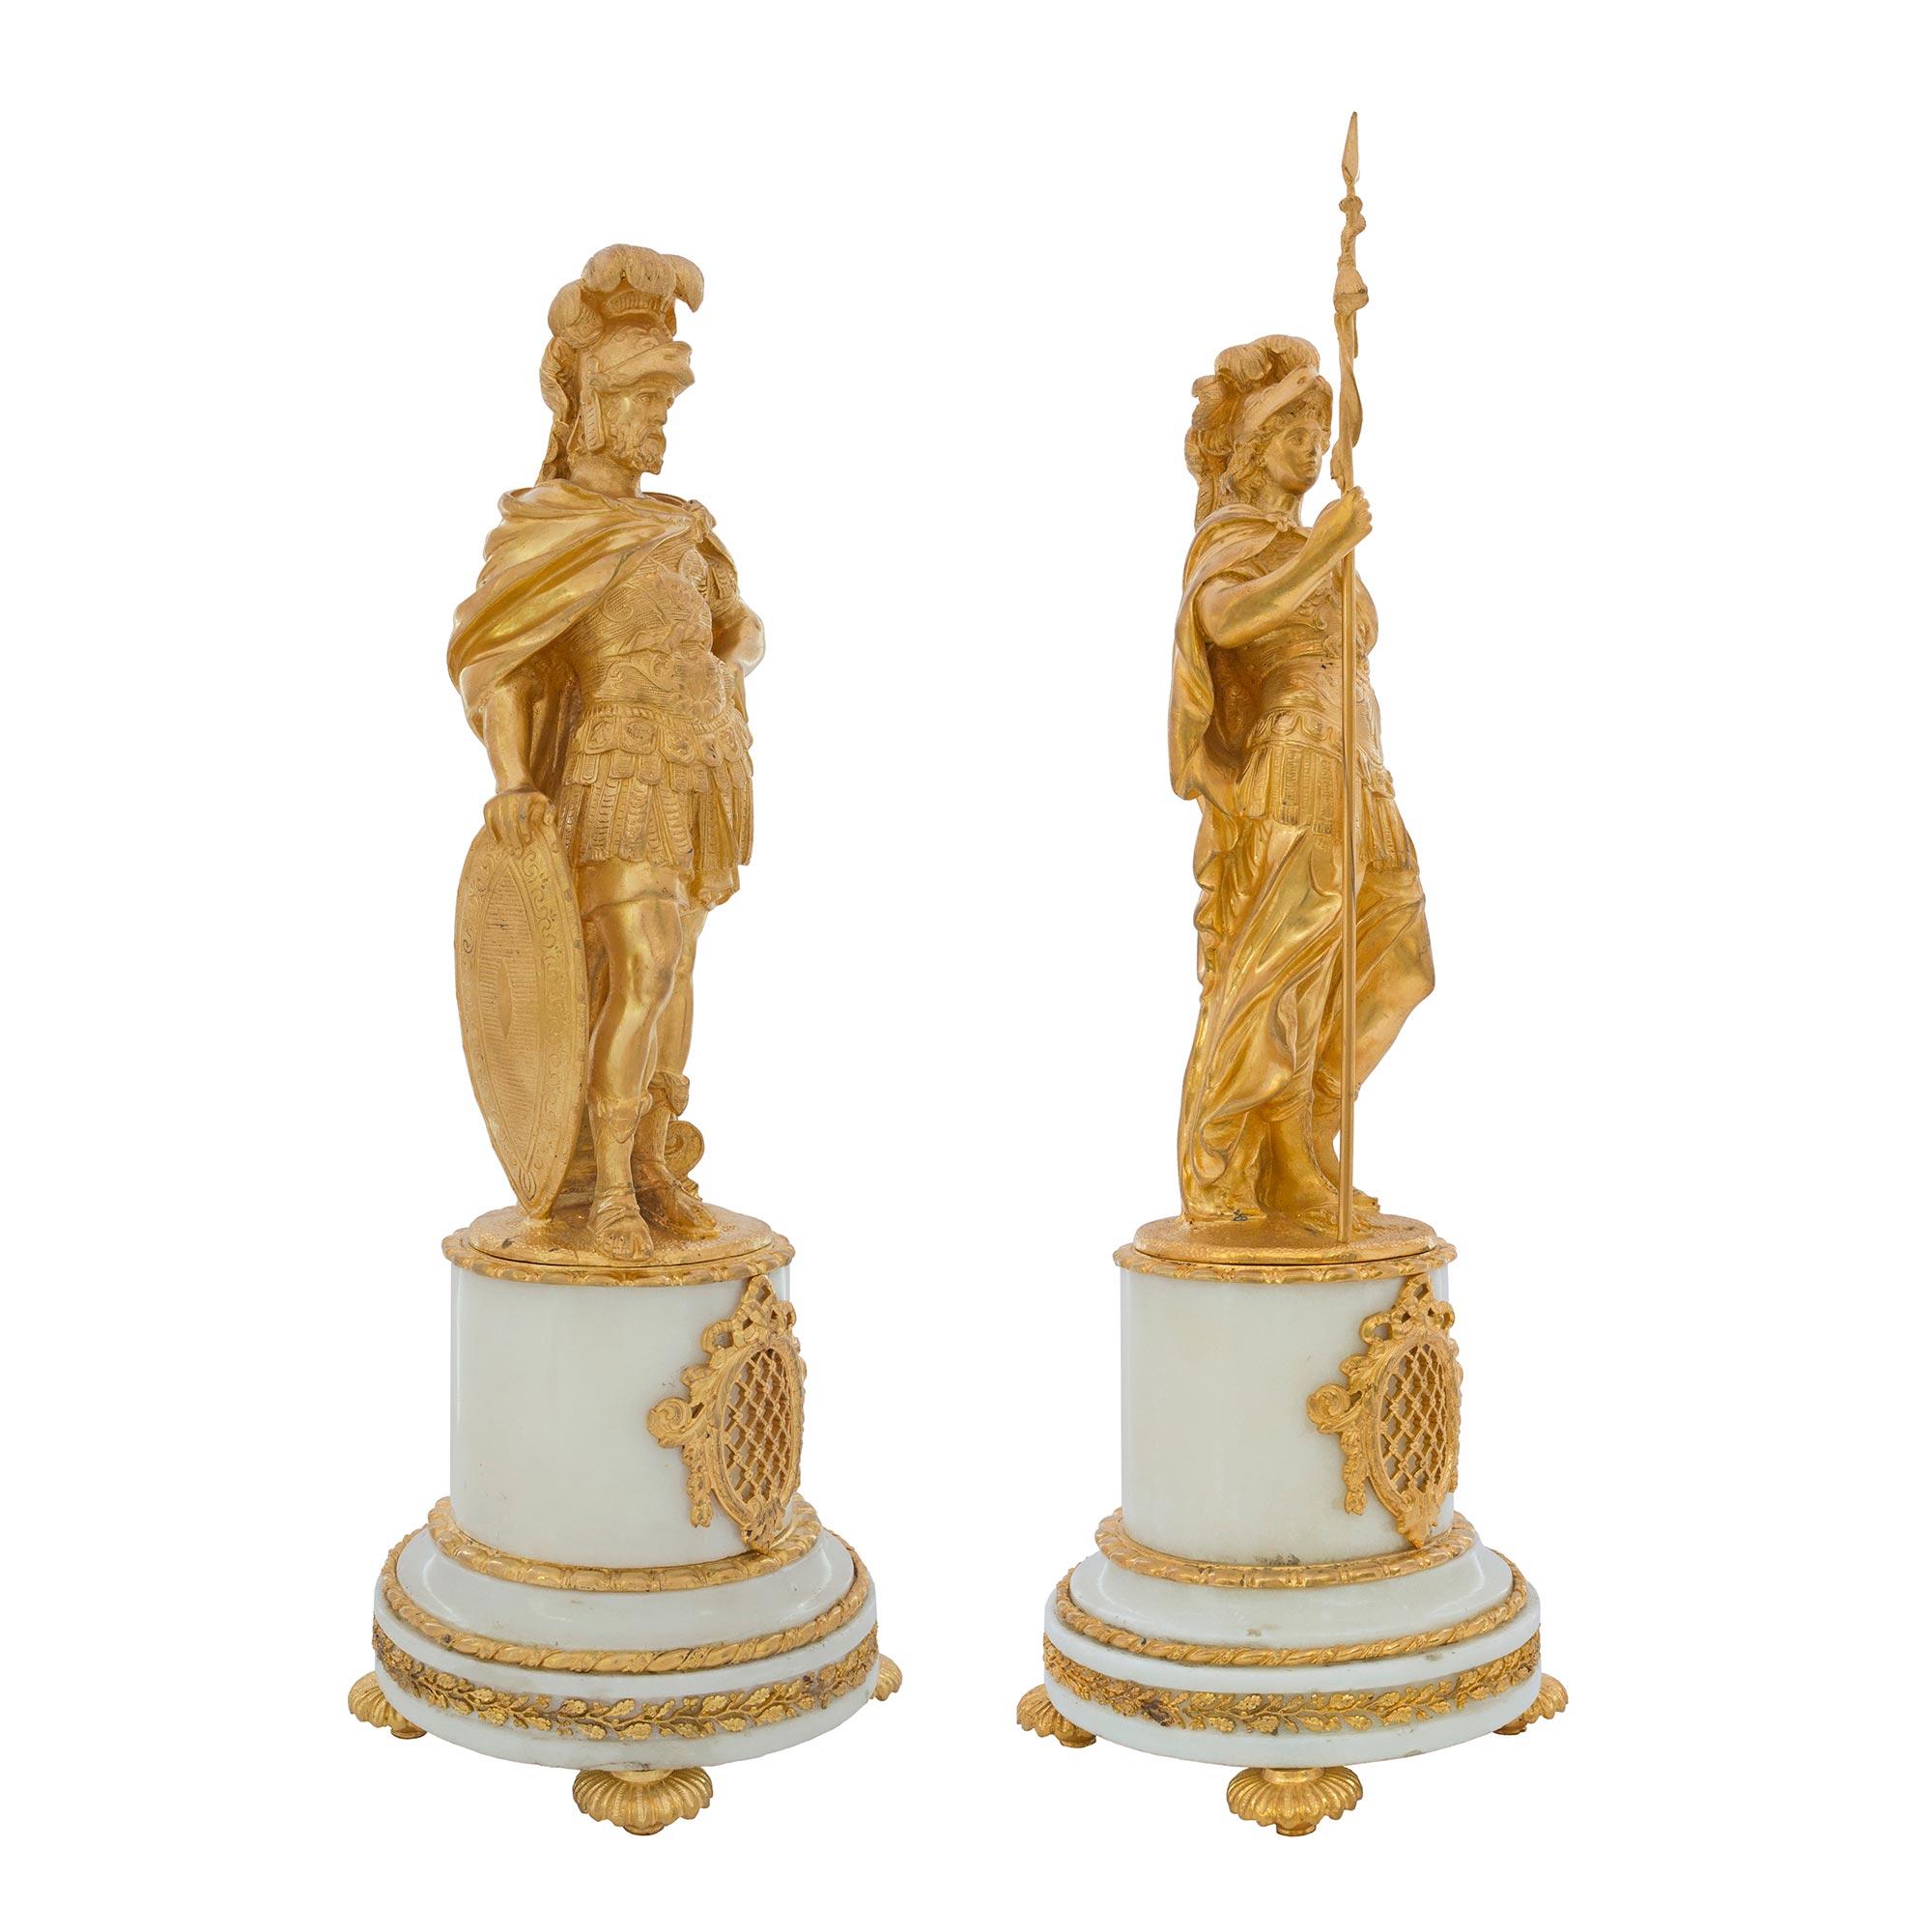 A handsome pair of French Louis XVI st. 19th century statue depicting Mars and Minerva. Each statue is raised by a White Carrara circular pedestal above ormolu topie shaped supports. The pedestal is decorated by foliate and twisted bands under a